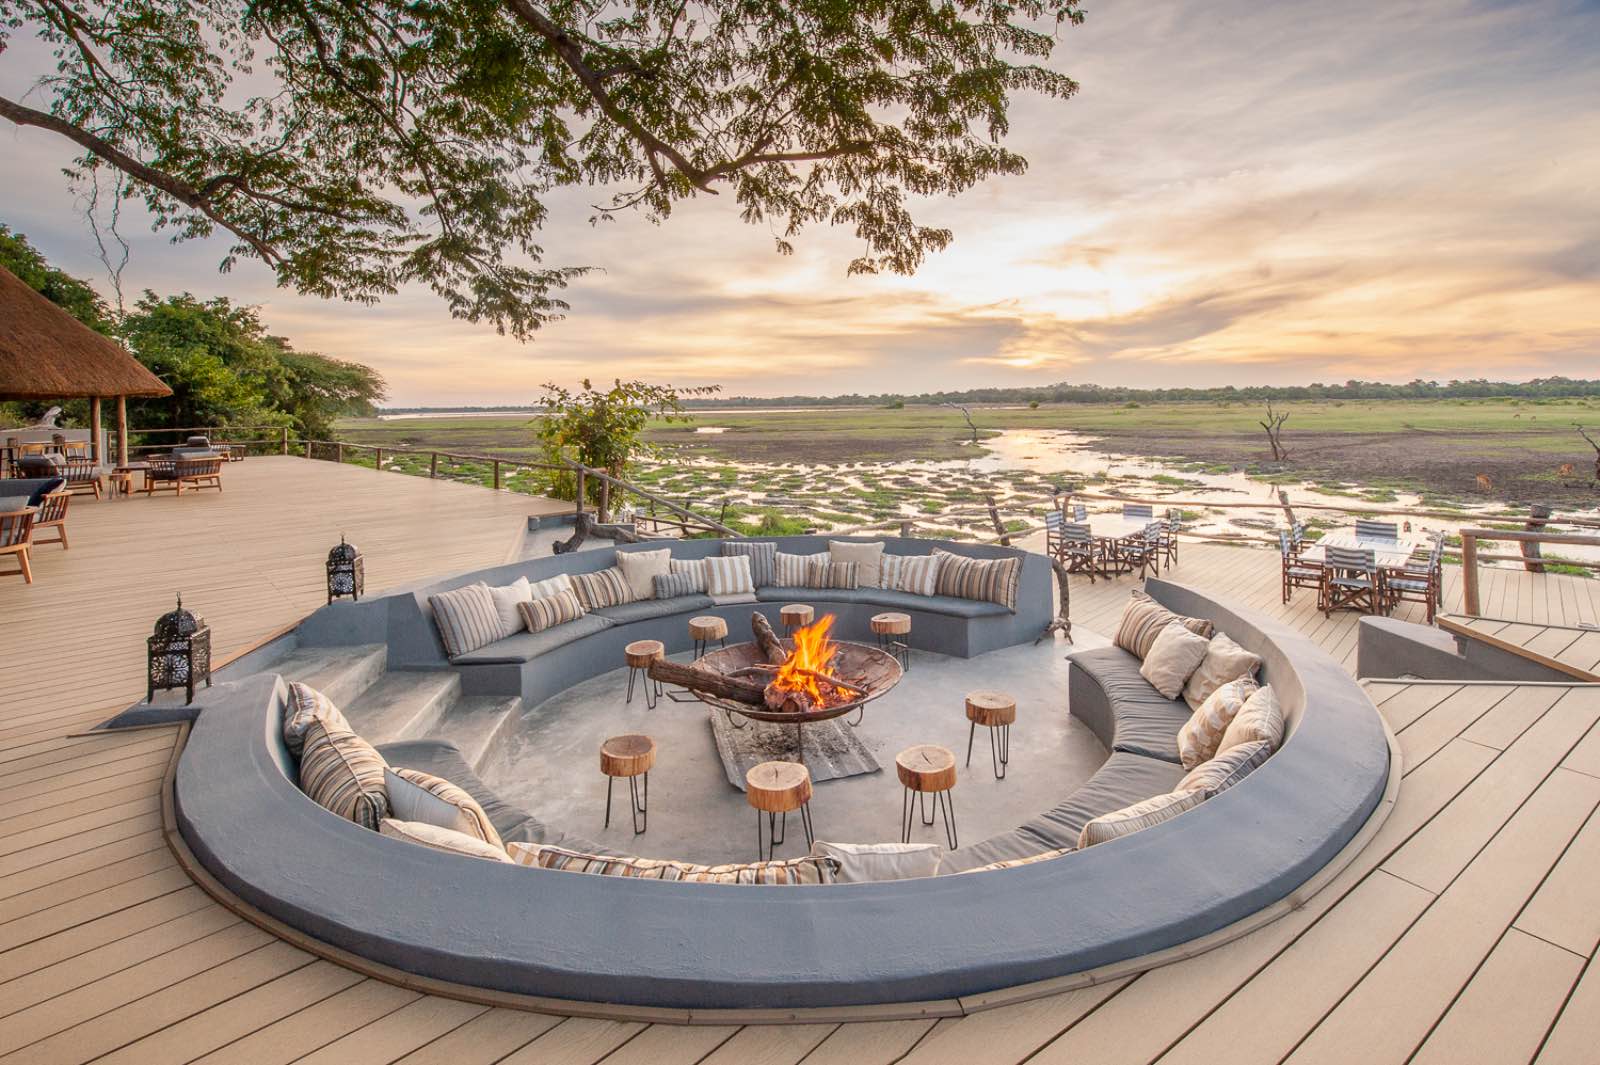 The sunken circular lounge surrounding the fire pit